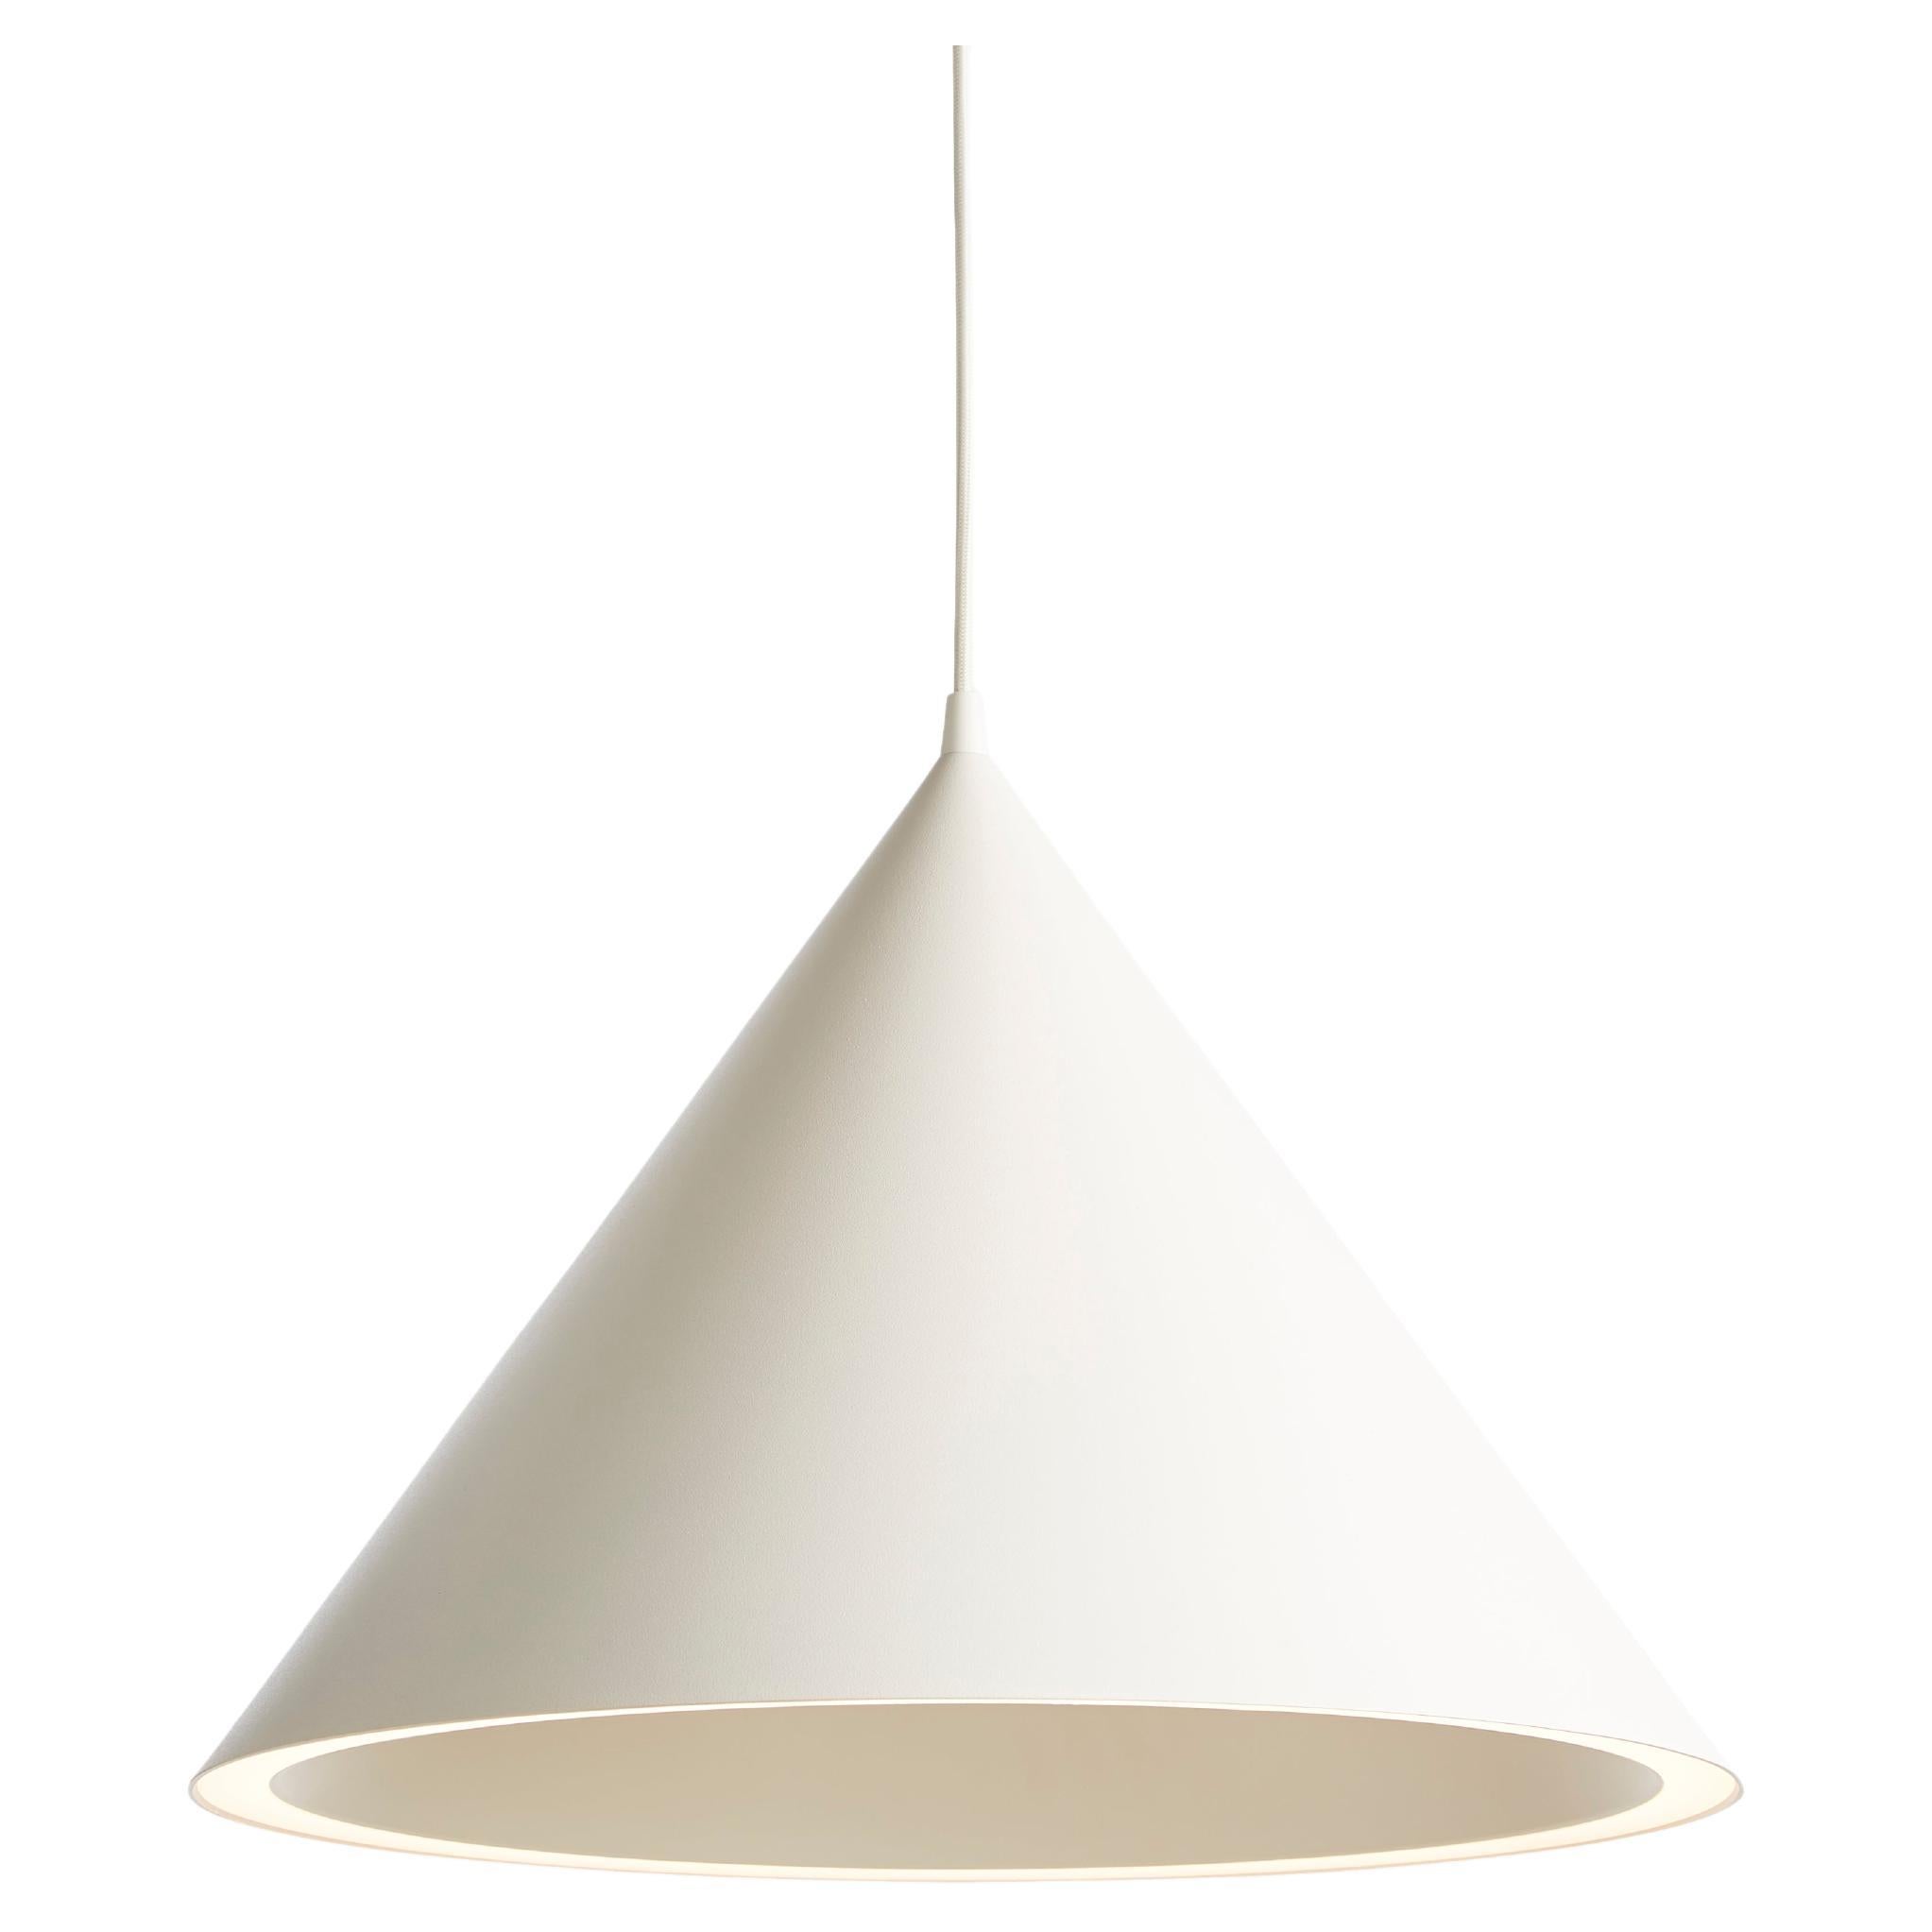 Large White Annular Pendant Lamp by MSDS Studio For Sale